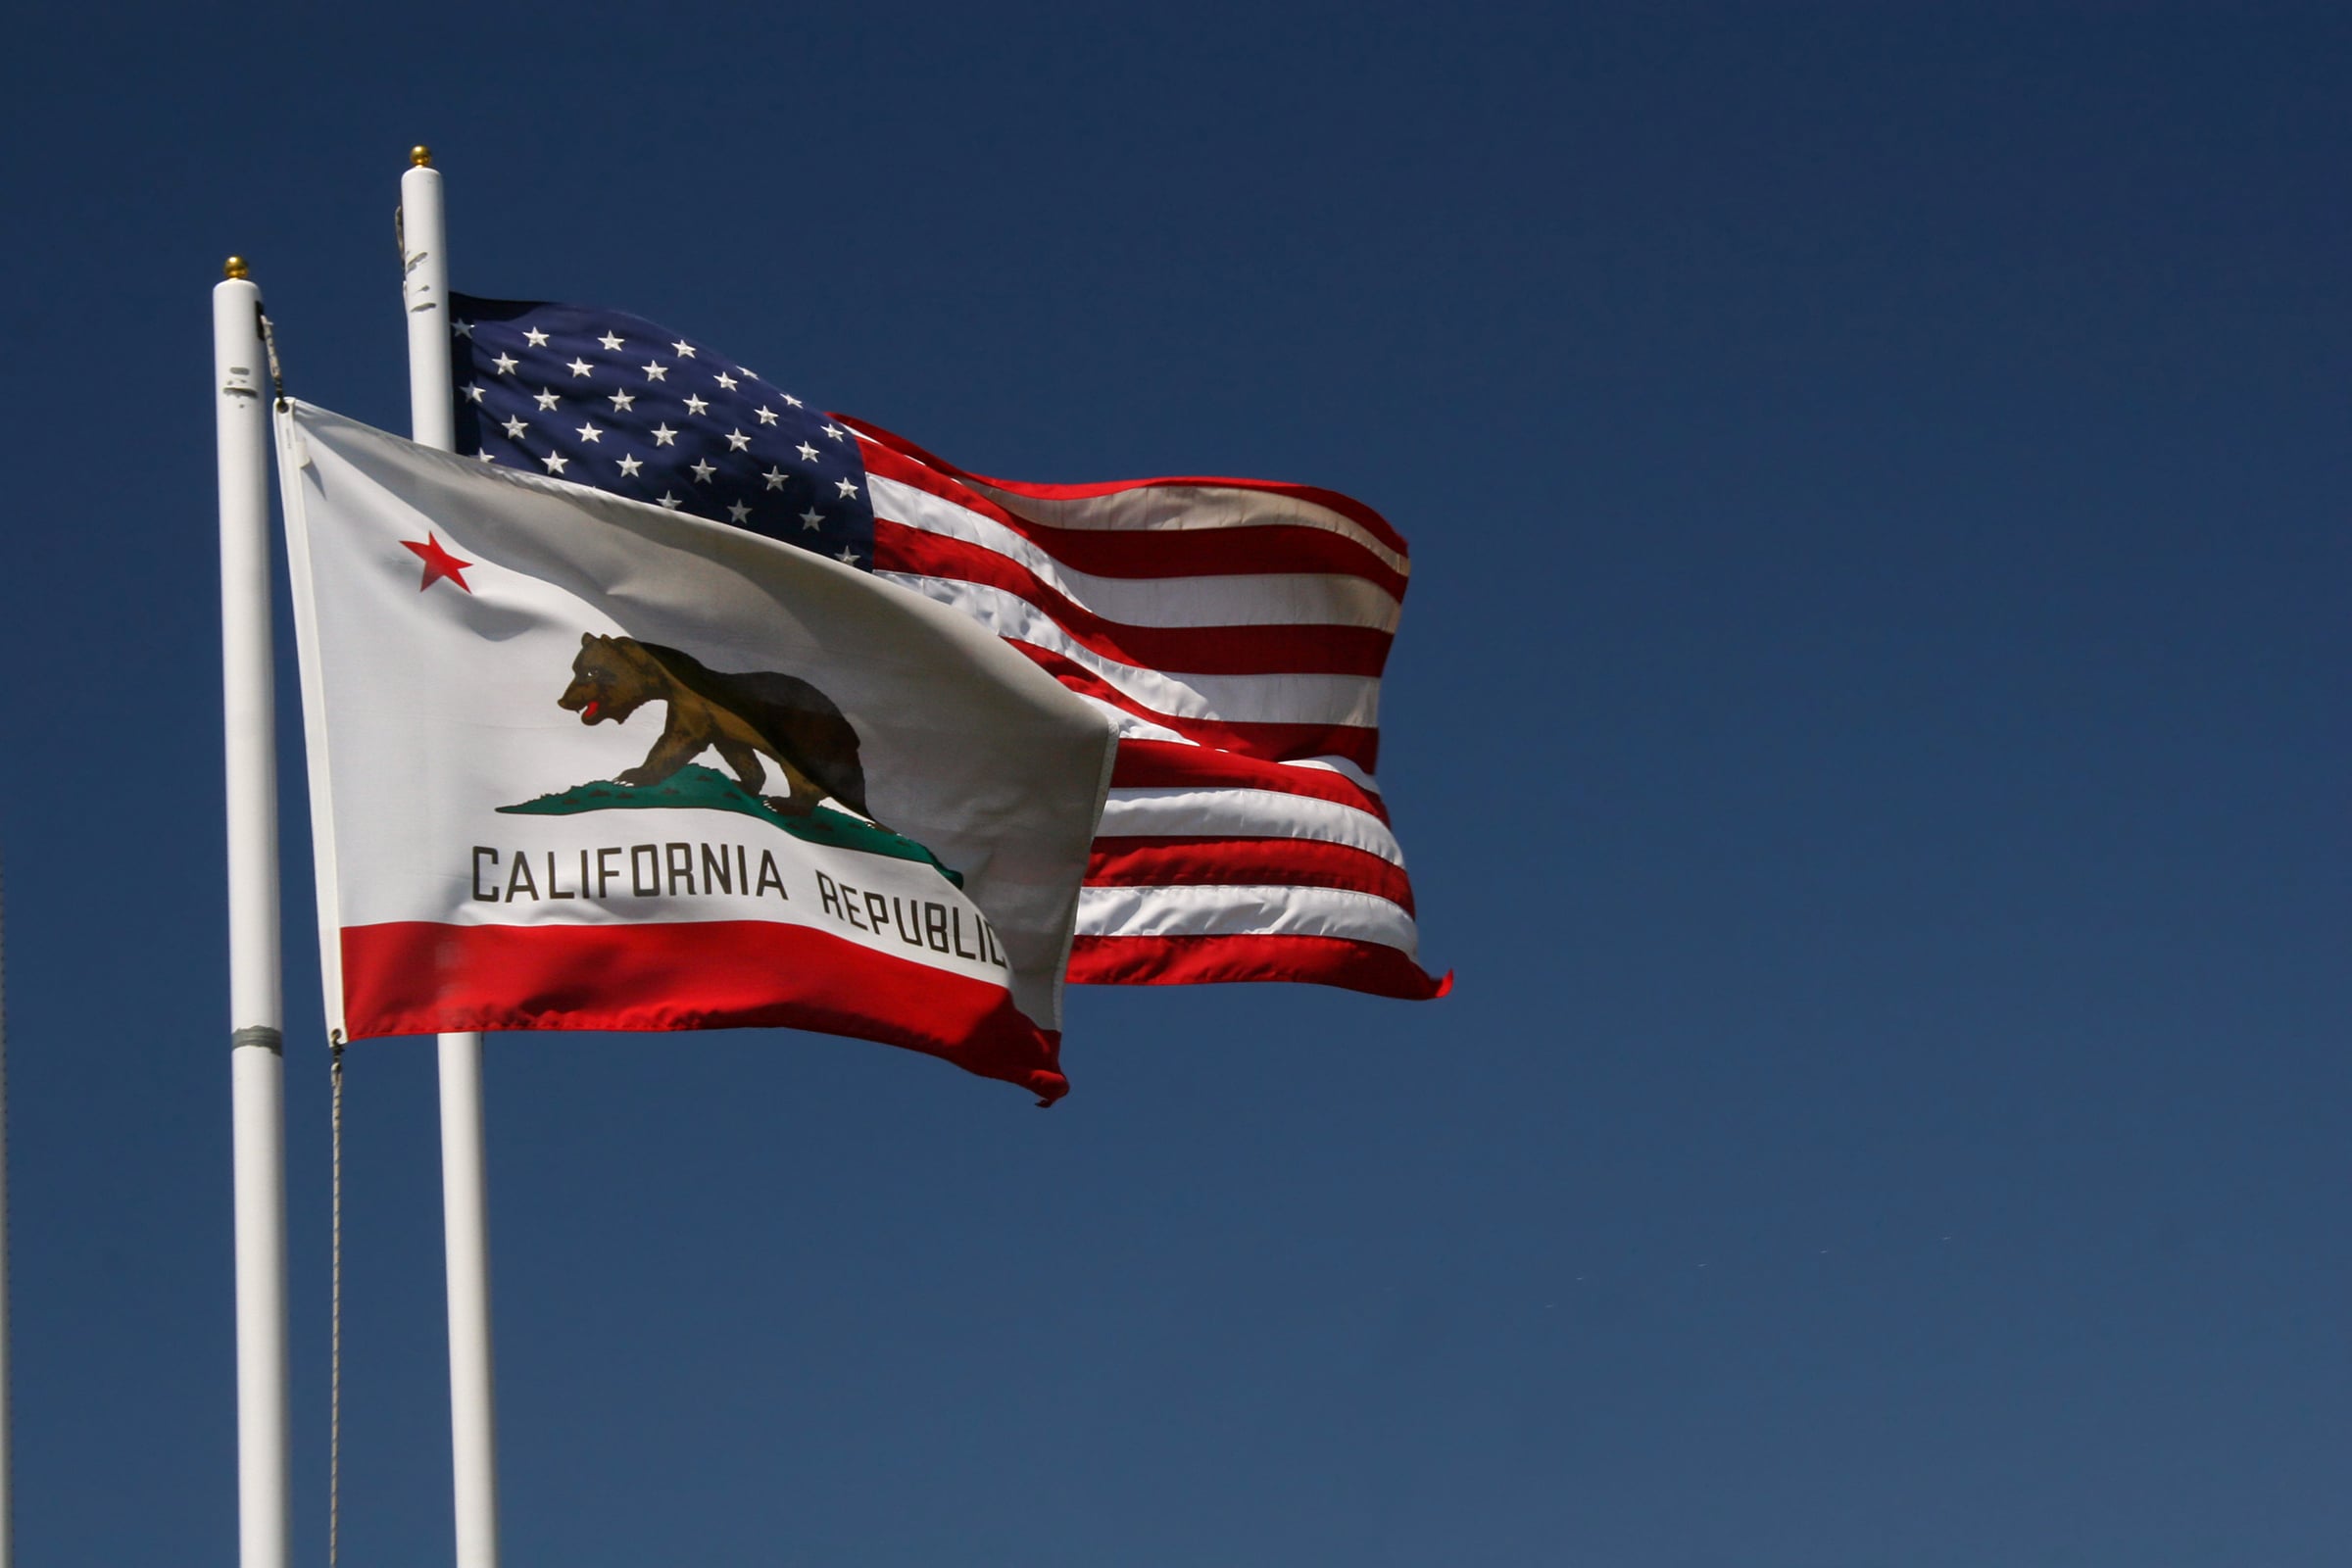 California and United States flags flying together on poles